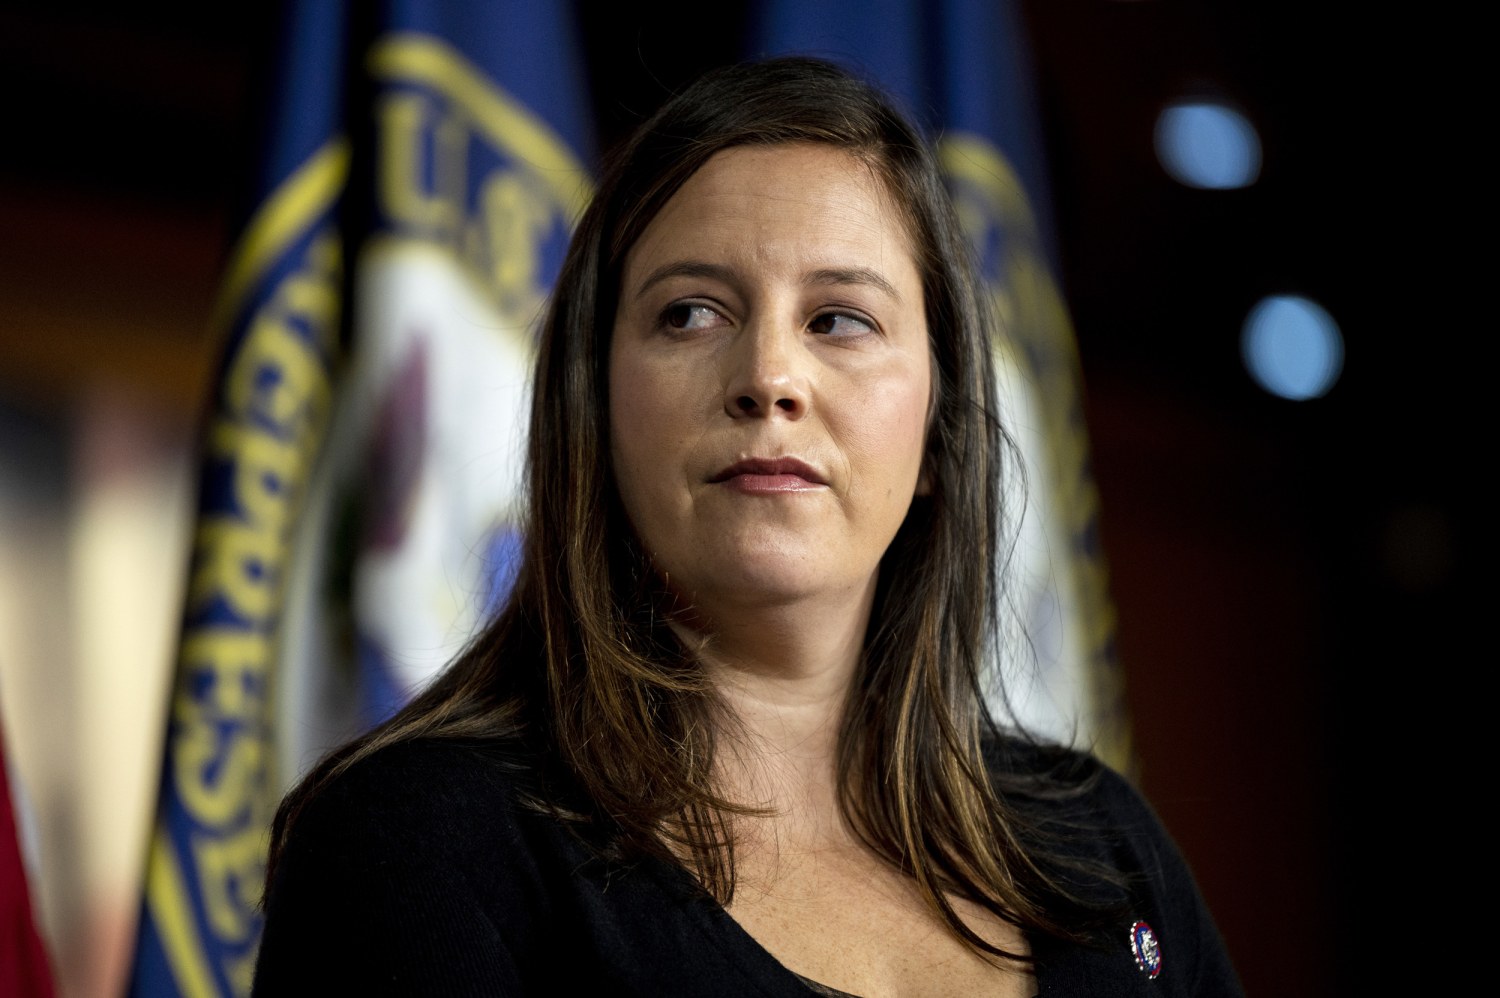 Shifts to the right catch up with the House GOP’s Elise Stefanik